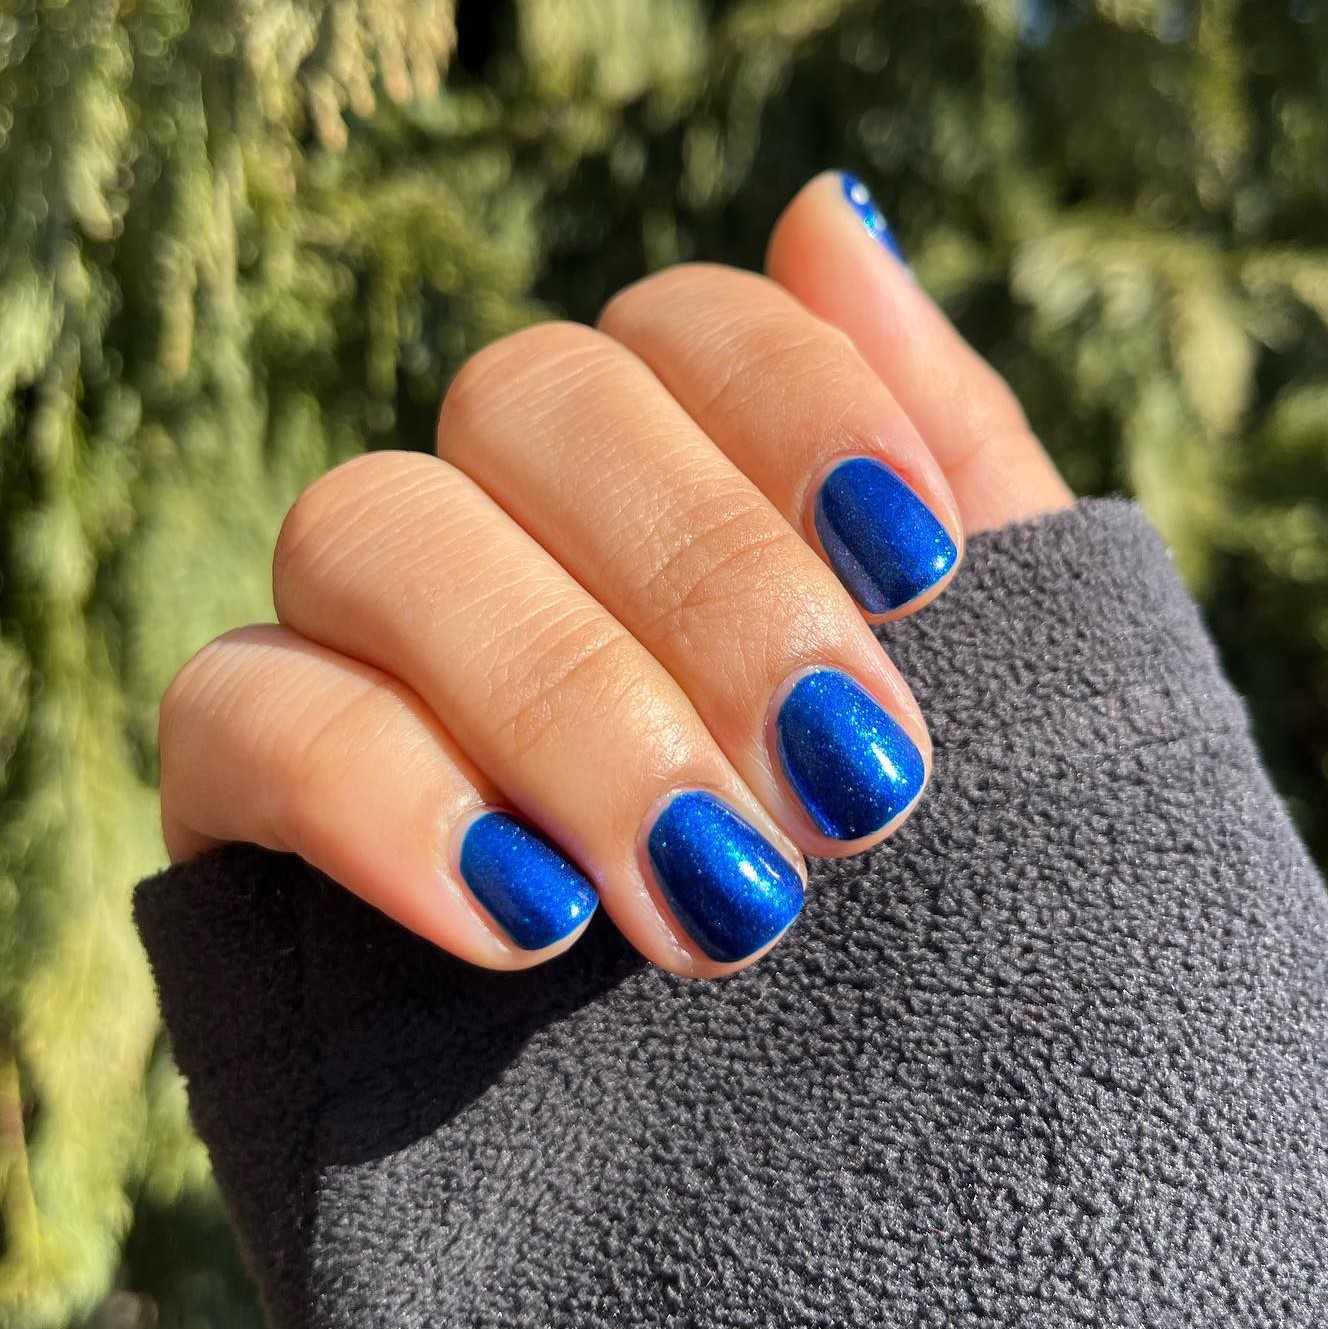 Winter nail colors and designs to try this season